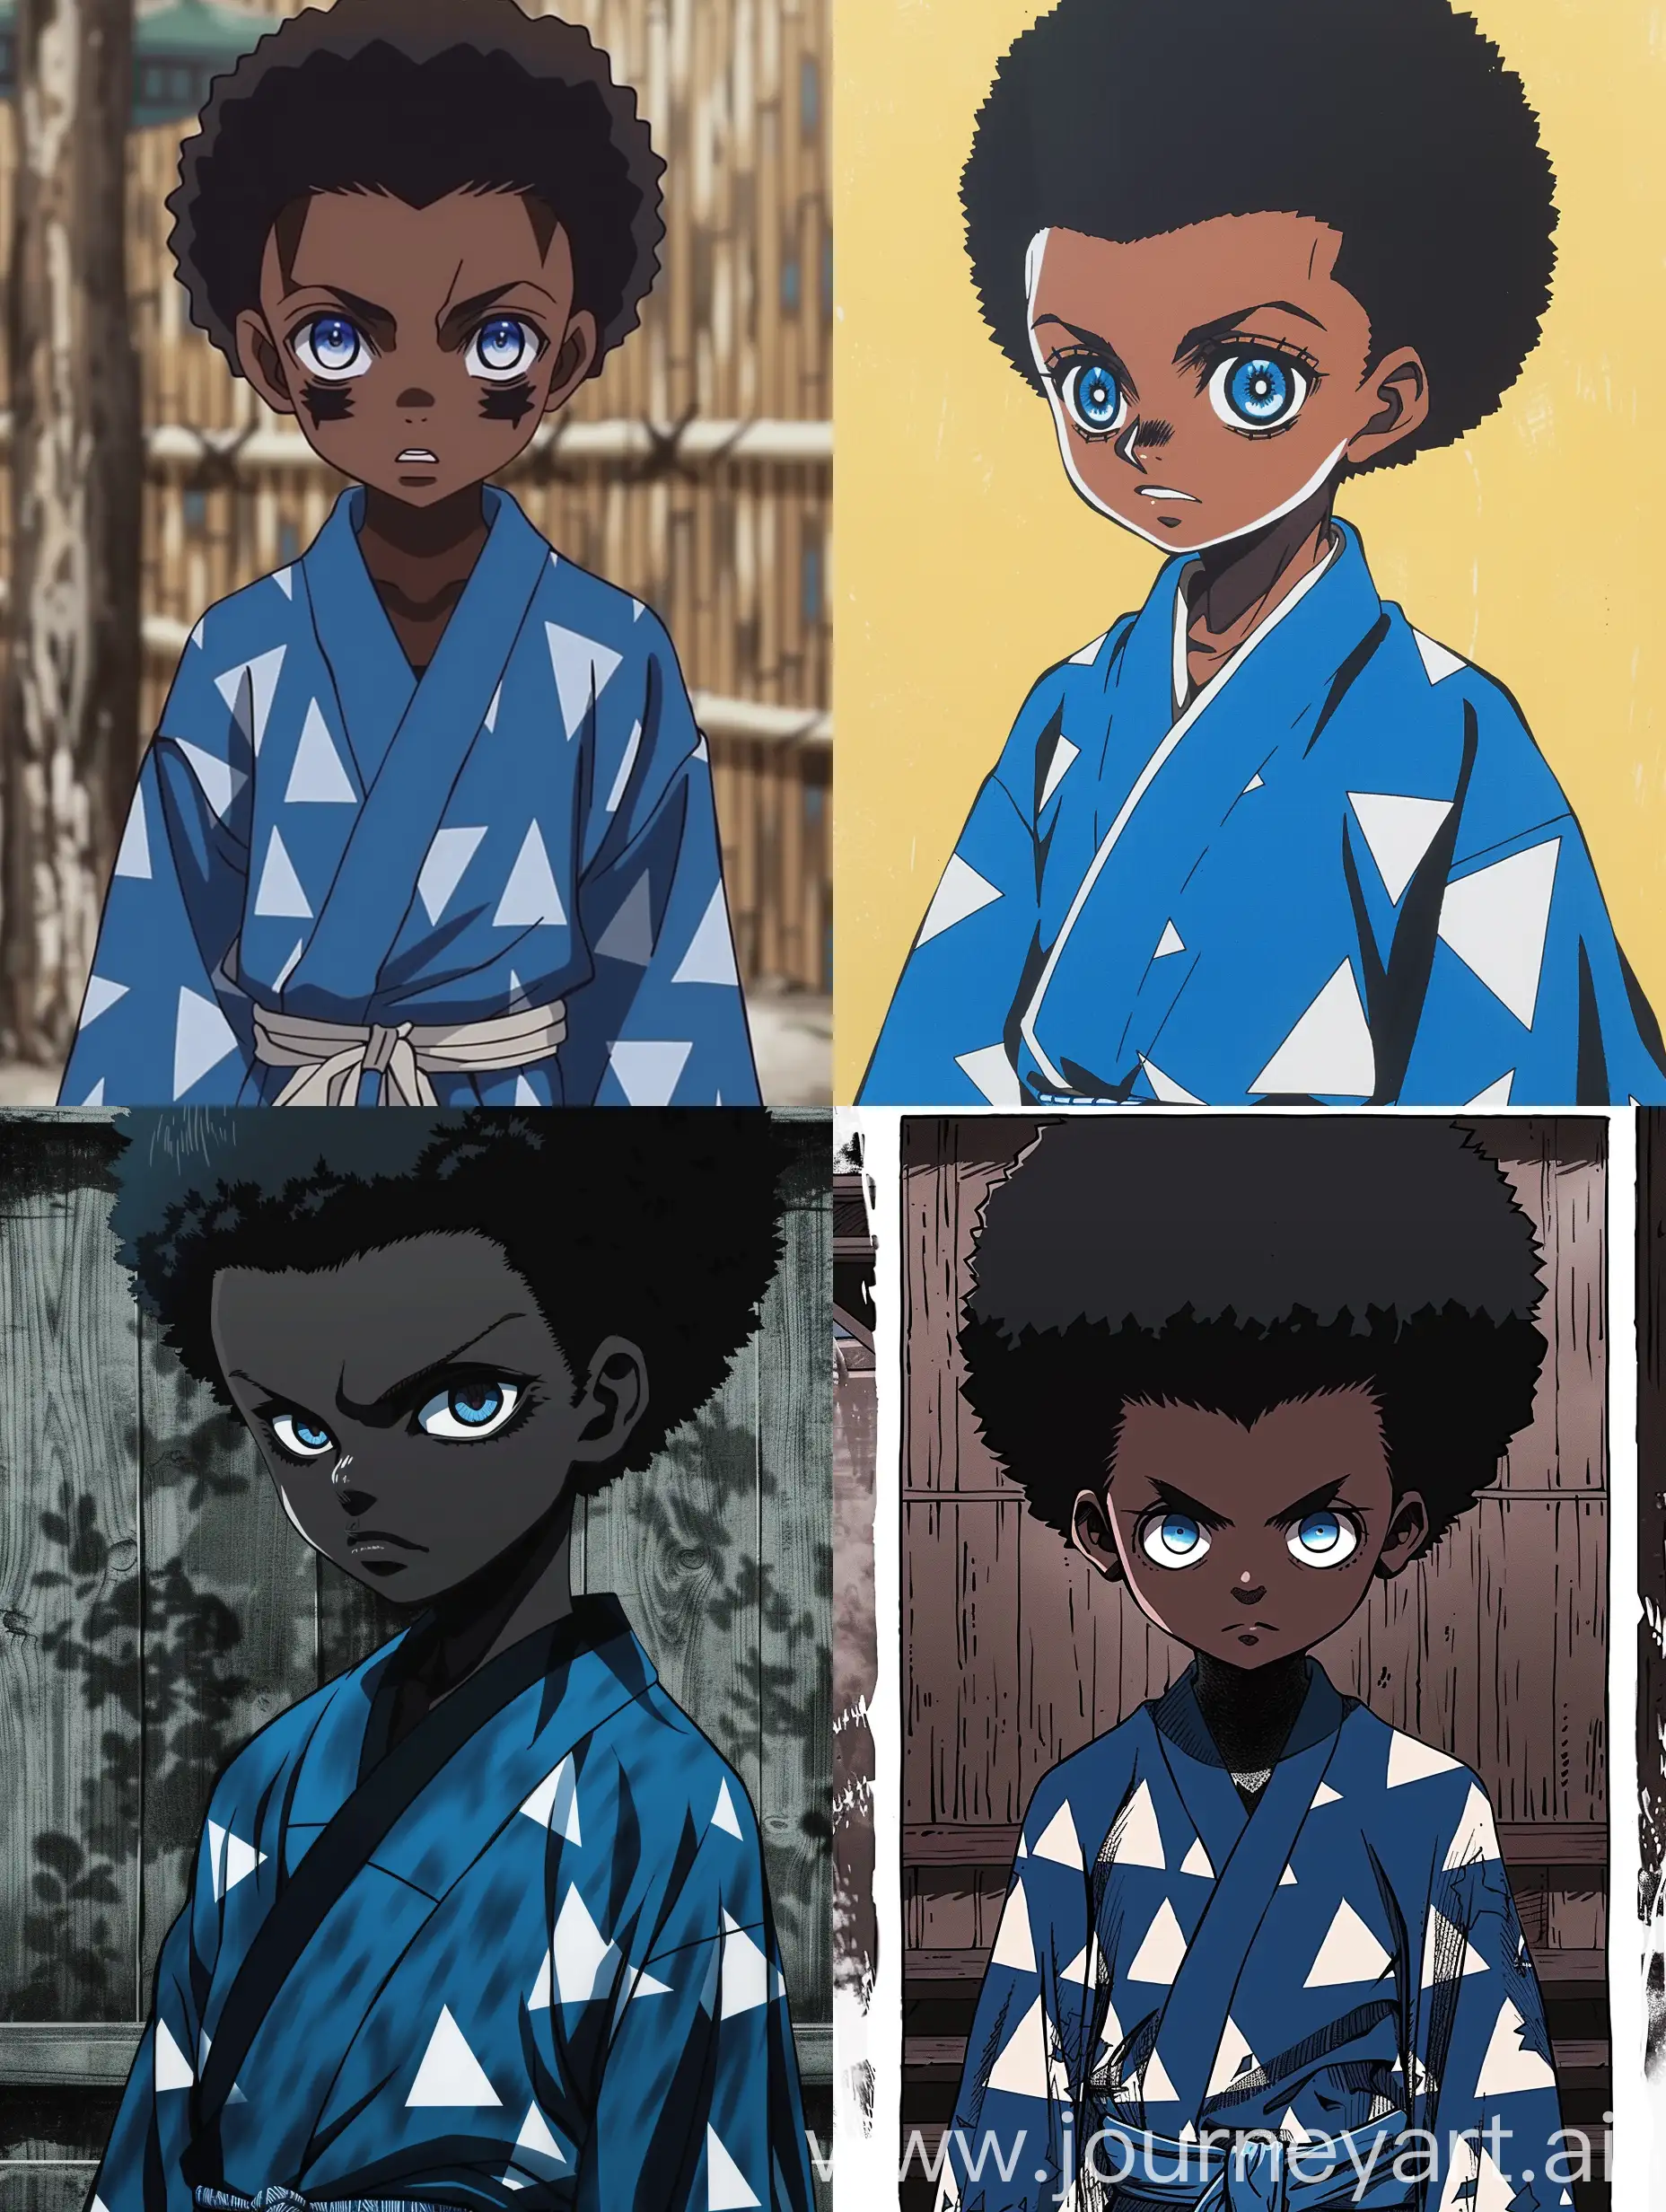 screencap kimetsu no yaiba panel of a black boy with a buzz cut afro, black skin, wearing a blue haori with white triangle patterns and having blue eyes, looking like an African American